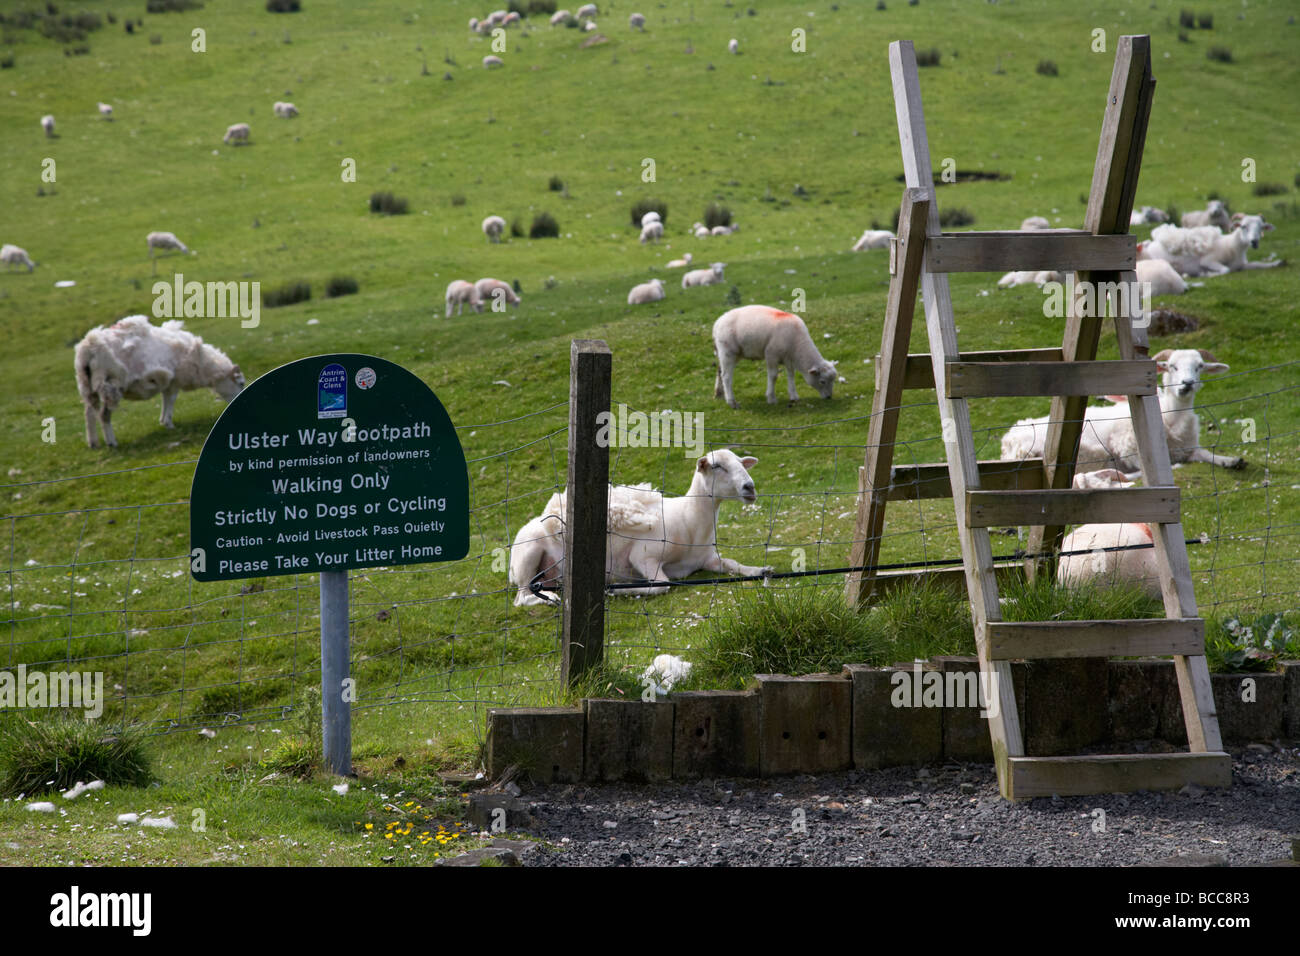 ulster way footpath wooden stile and flock of part shorn sheep in fields in county antrim northern ireland uk Stock Photo